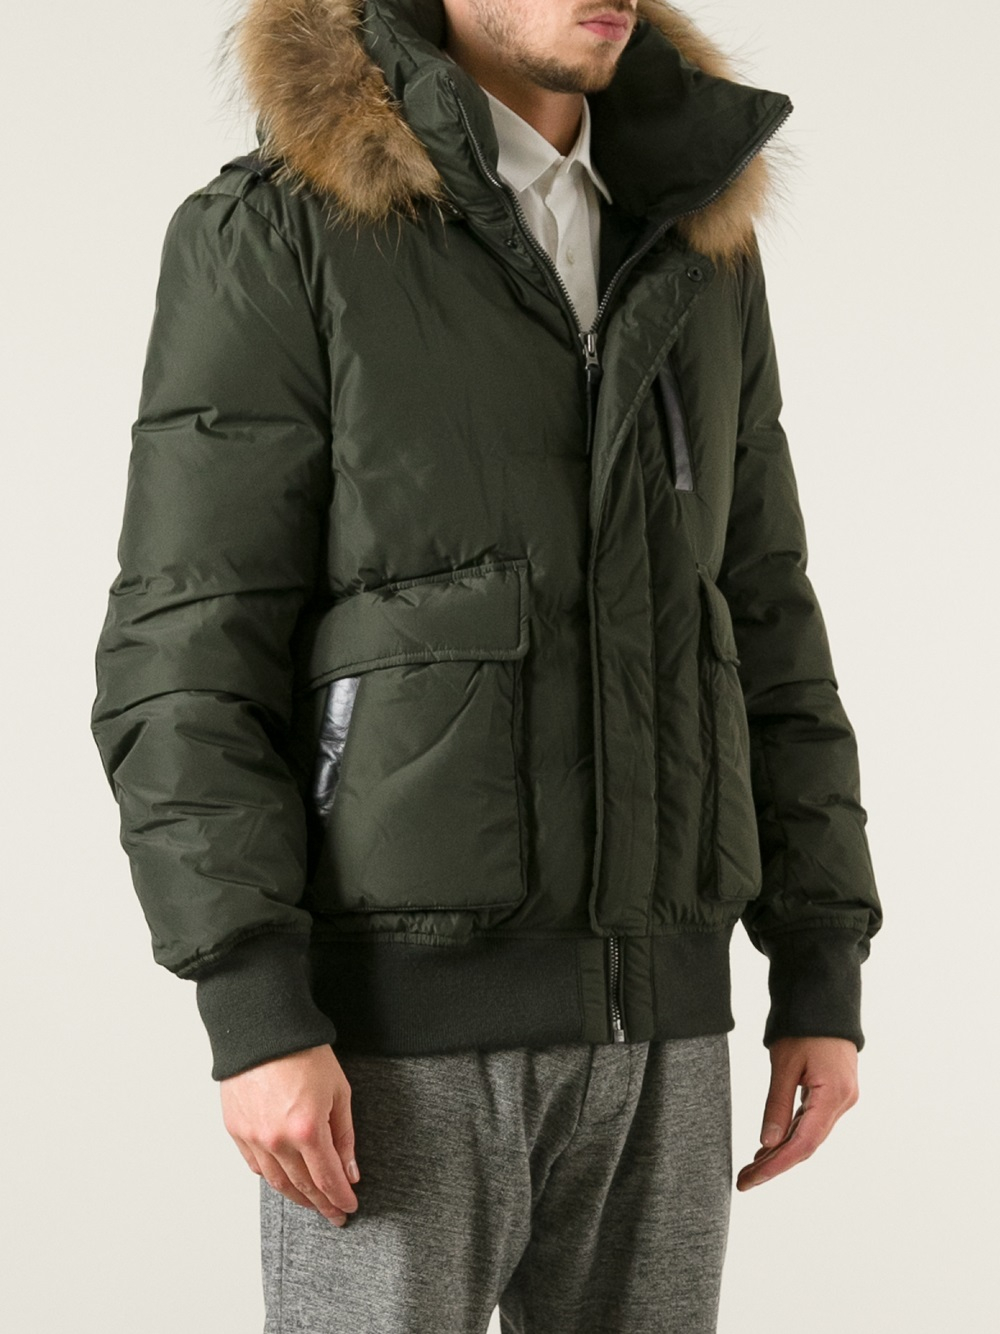 Lyst - Mackage Diego Padded Jacket in Green for Men